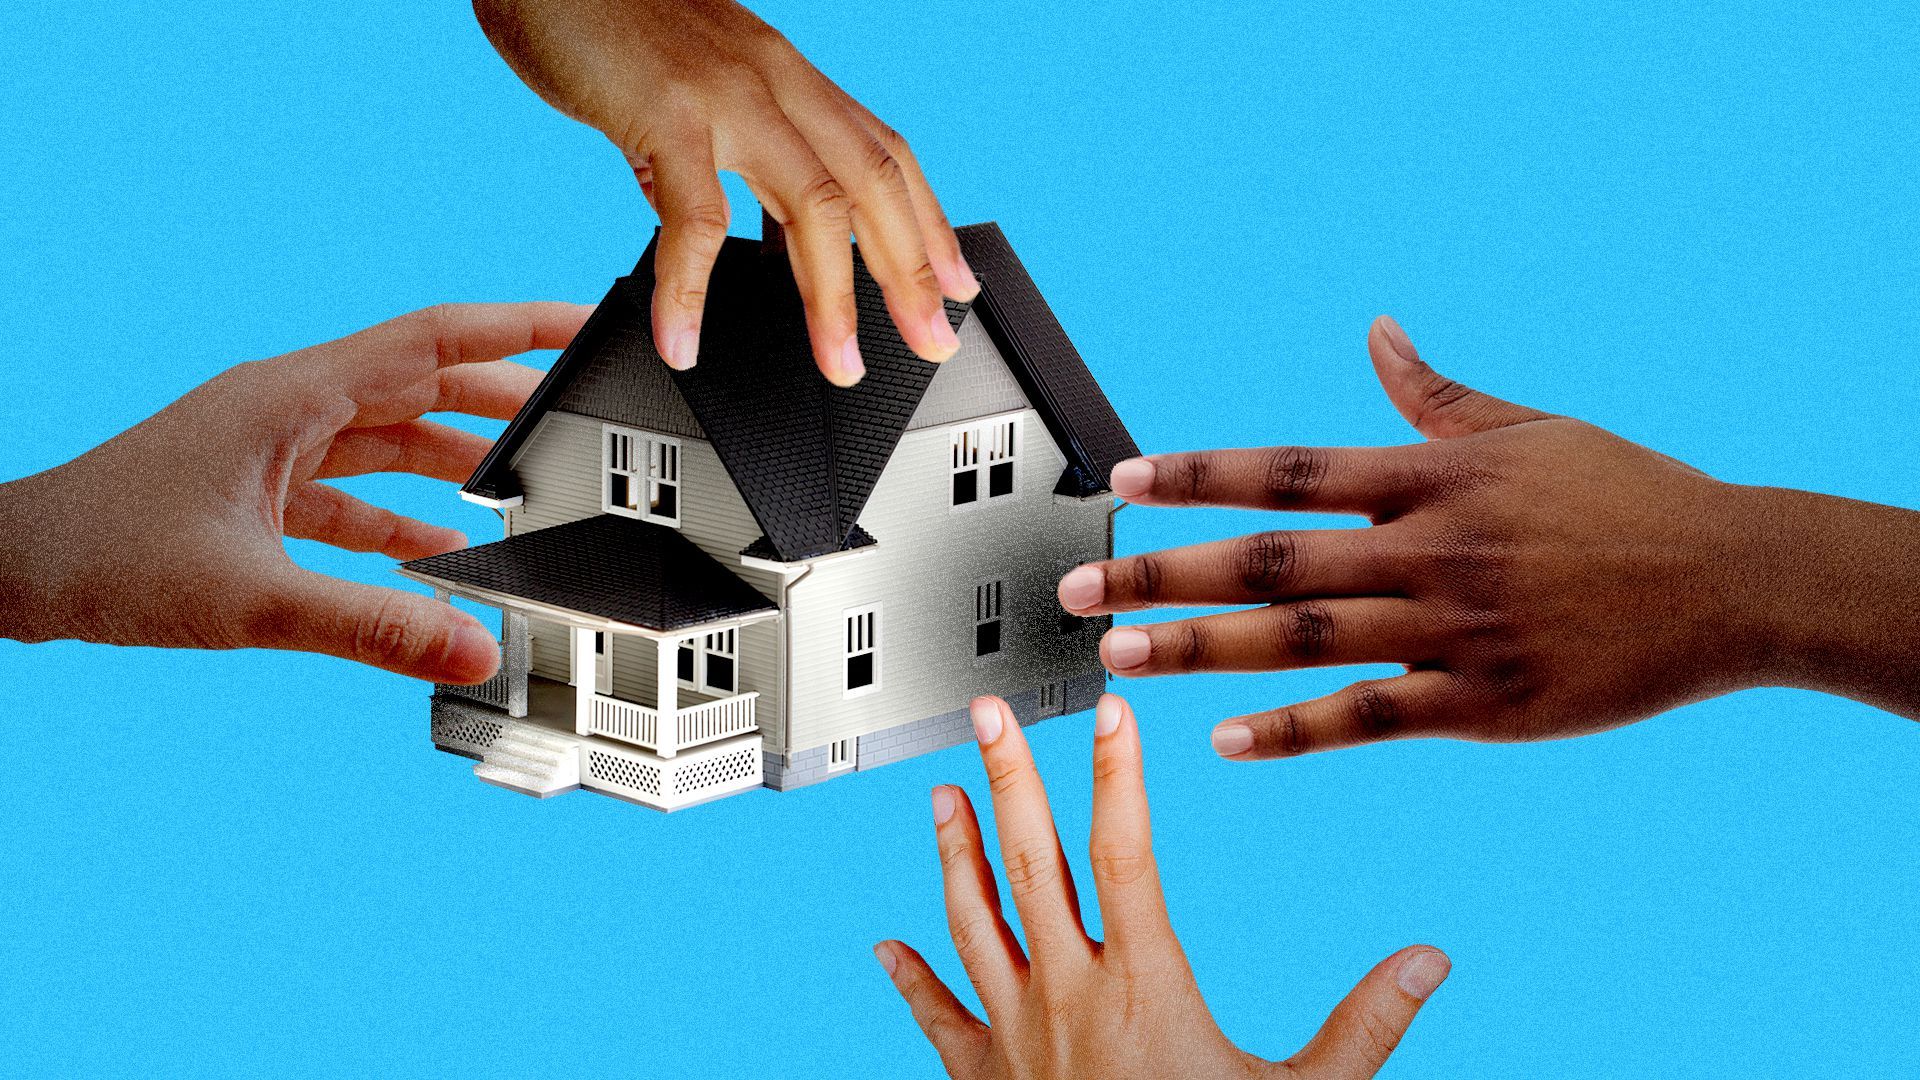 Illustration of four different people's hands reaching to grab one suburban house.